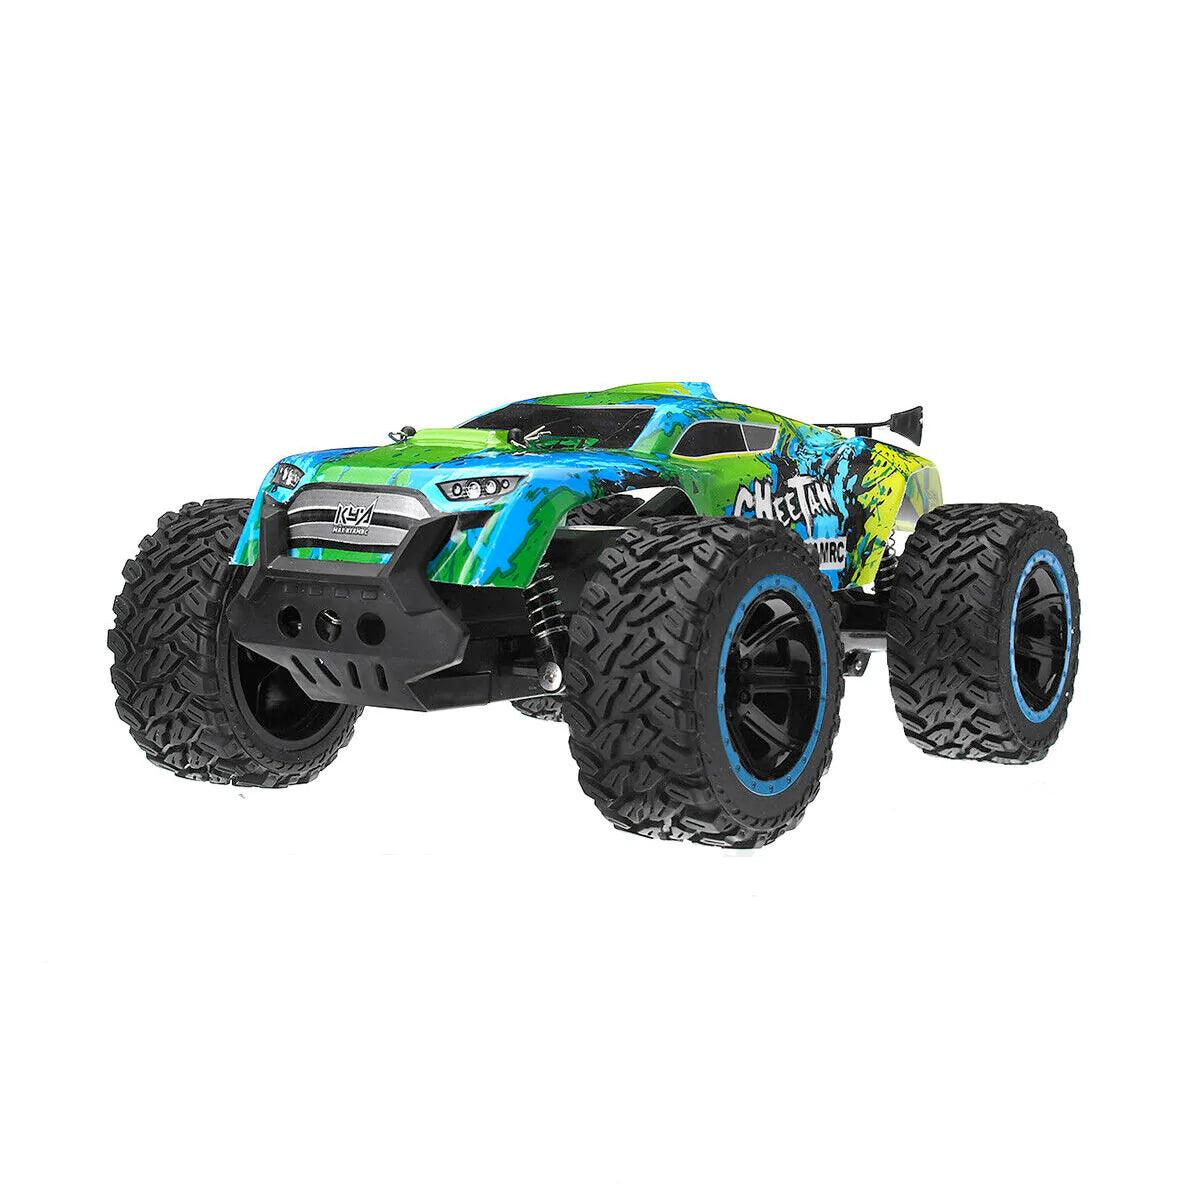 Dragon Fighter High Speed RC Racing Car - VirtuousWares:Global